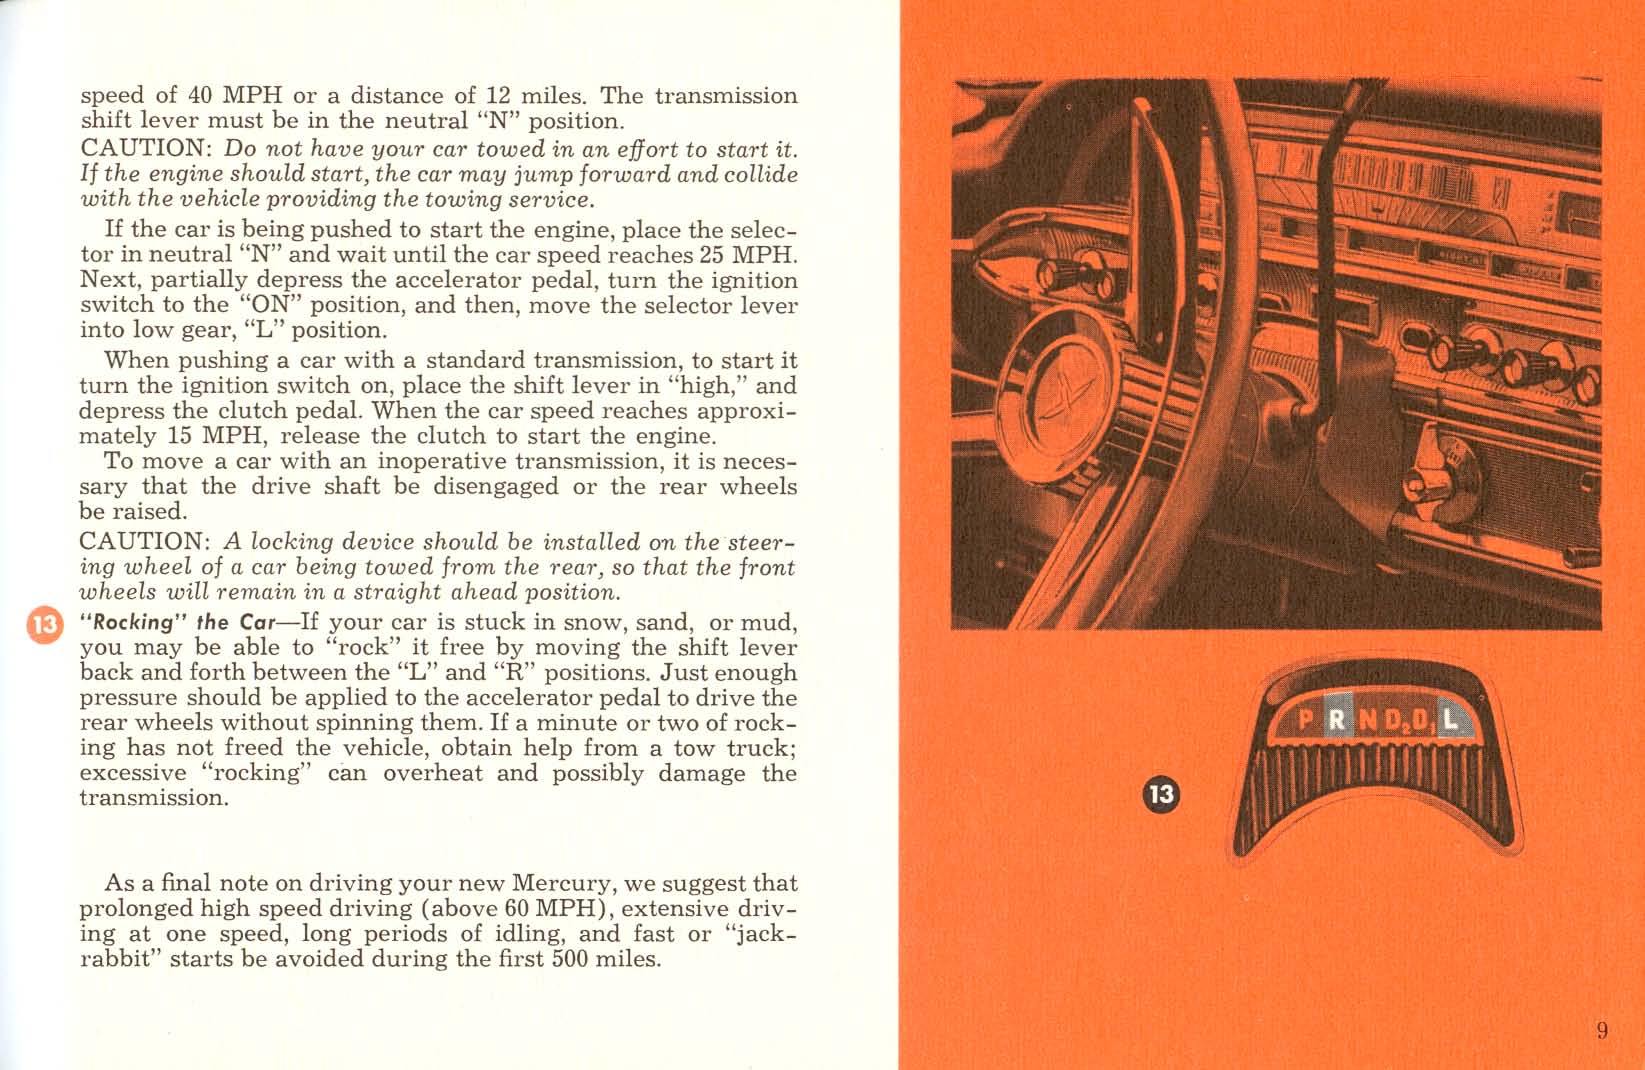 1961 Mercury Owners Manual Page 18